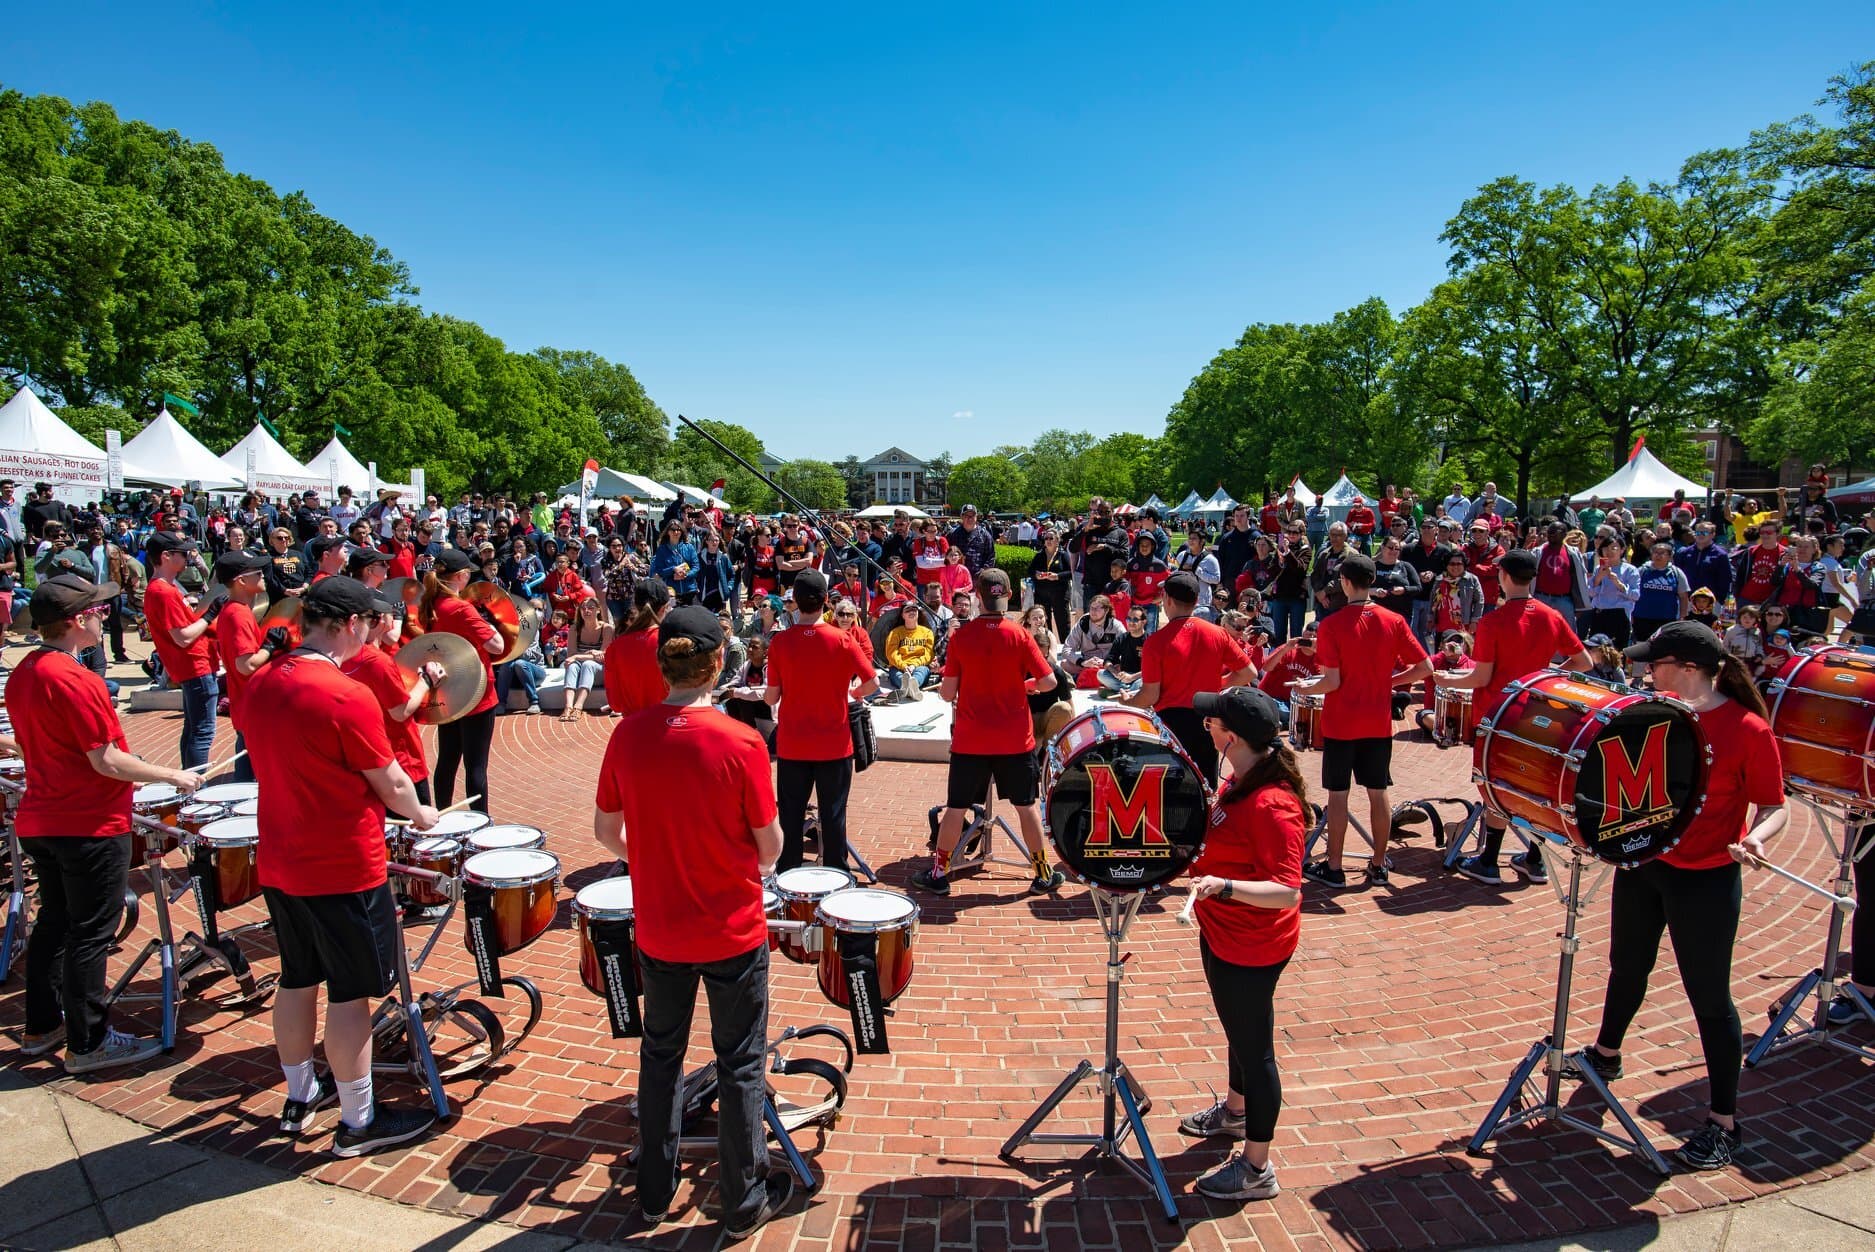 The Mighty Sound of Maryland drum line perform for Maryland Day attendees at the McKeldin Mall sundial, honoring Dutch astronomer Uco van Wijk